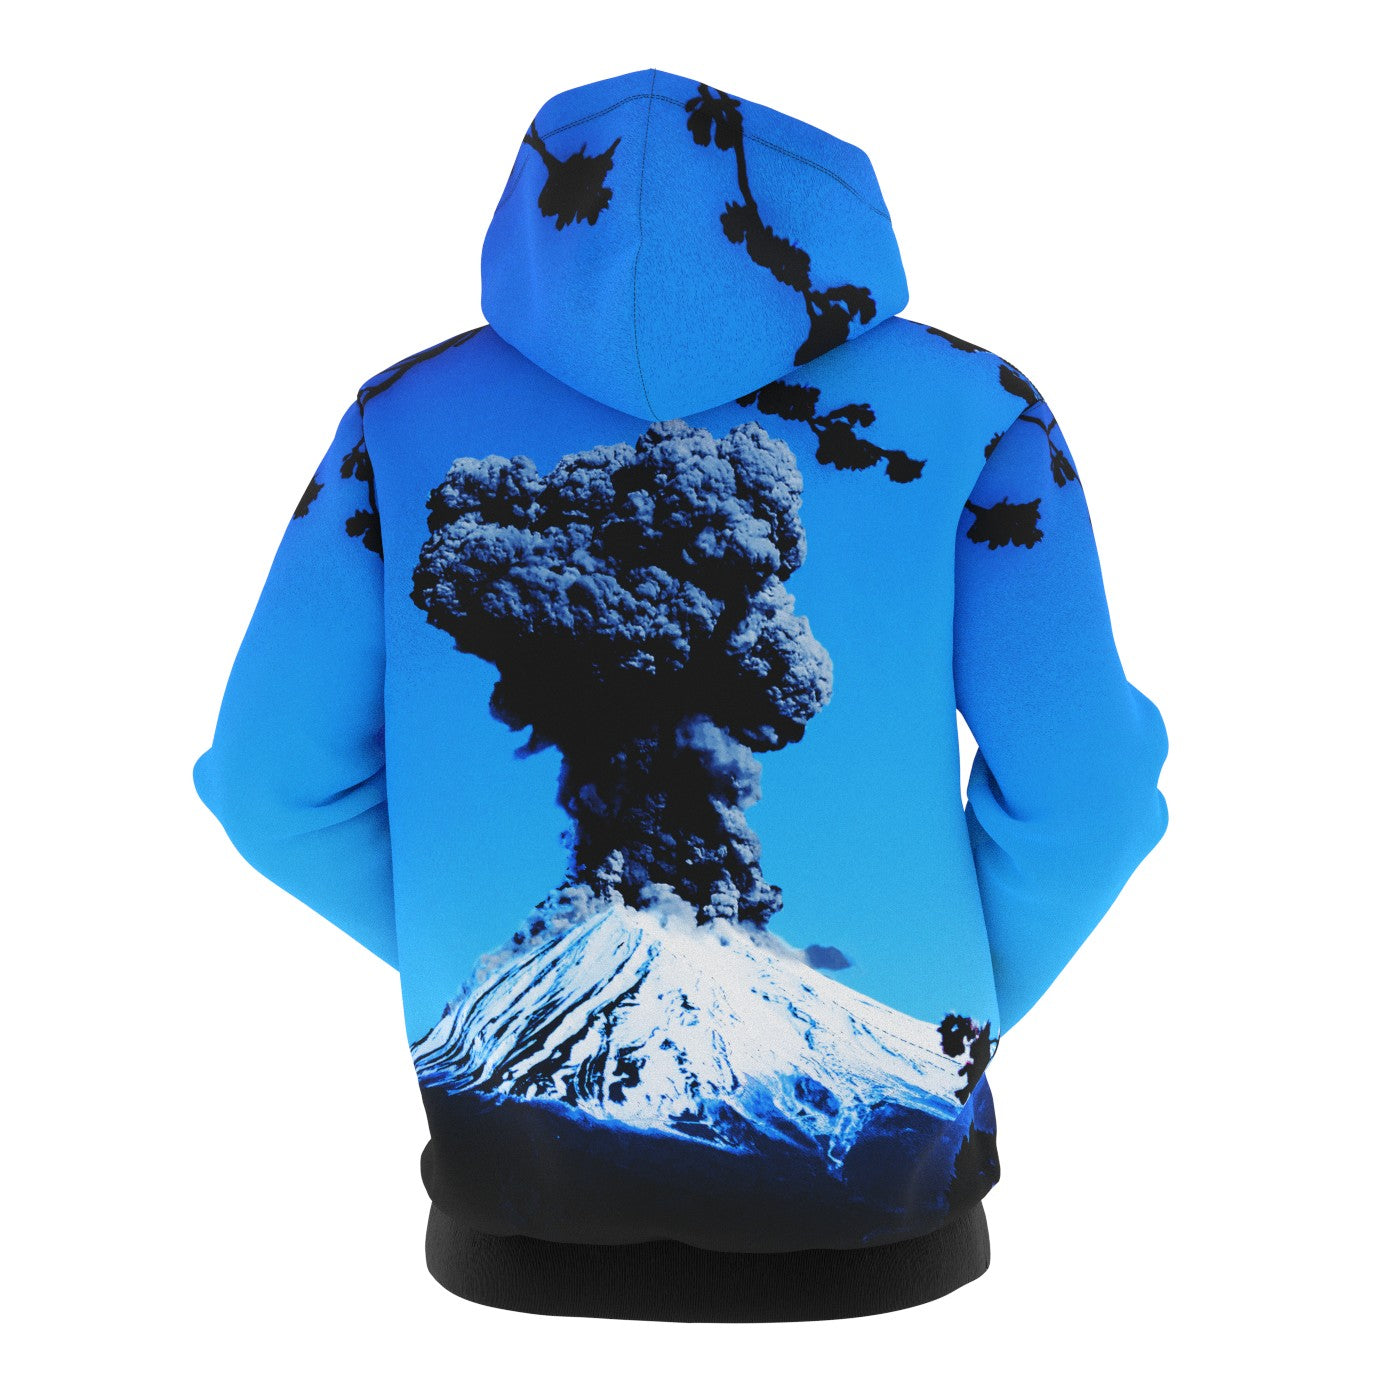 Chaotic Scenery Hoodie